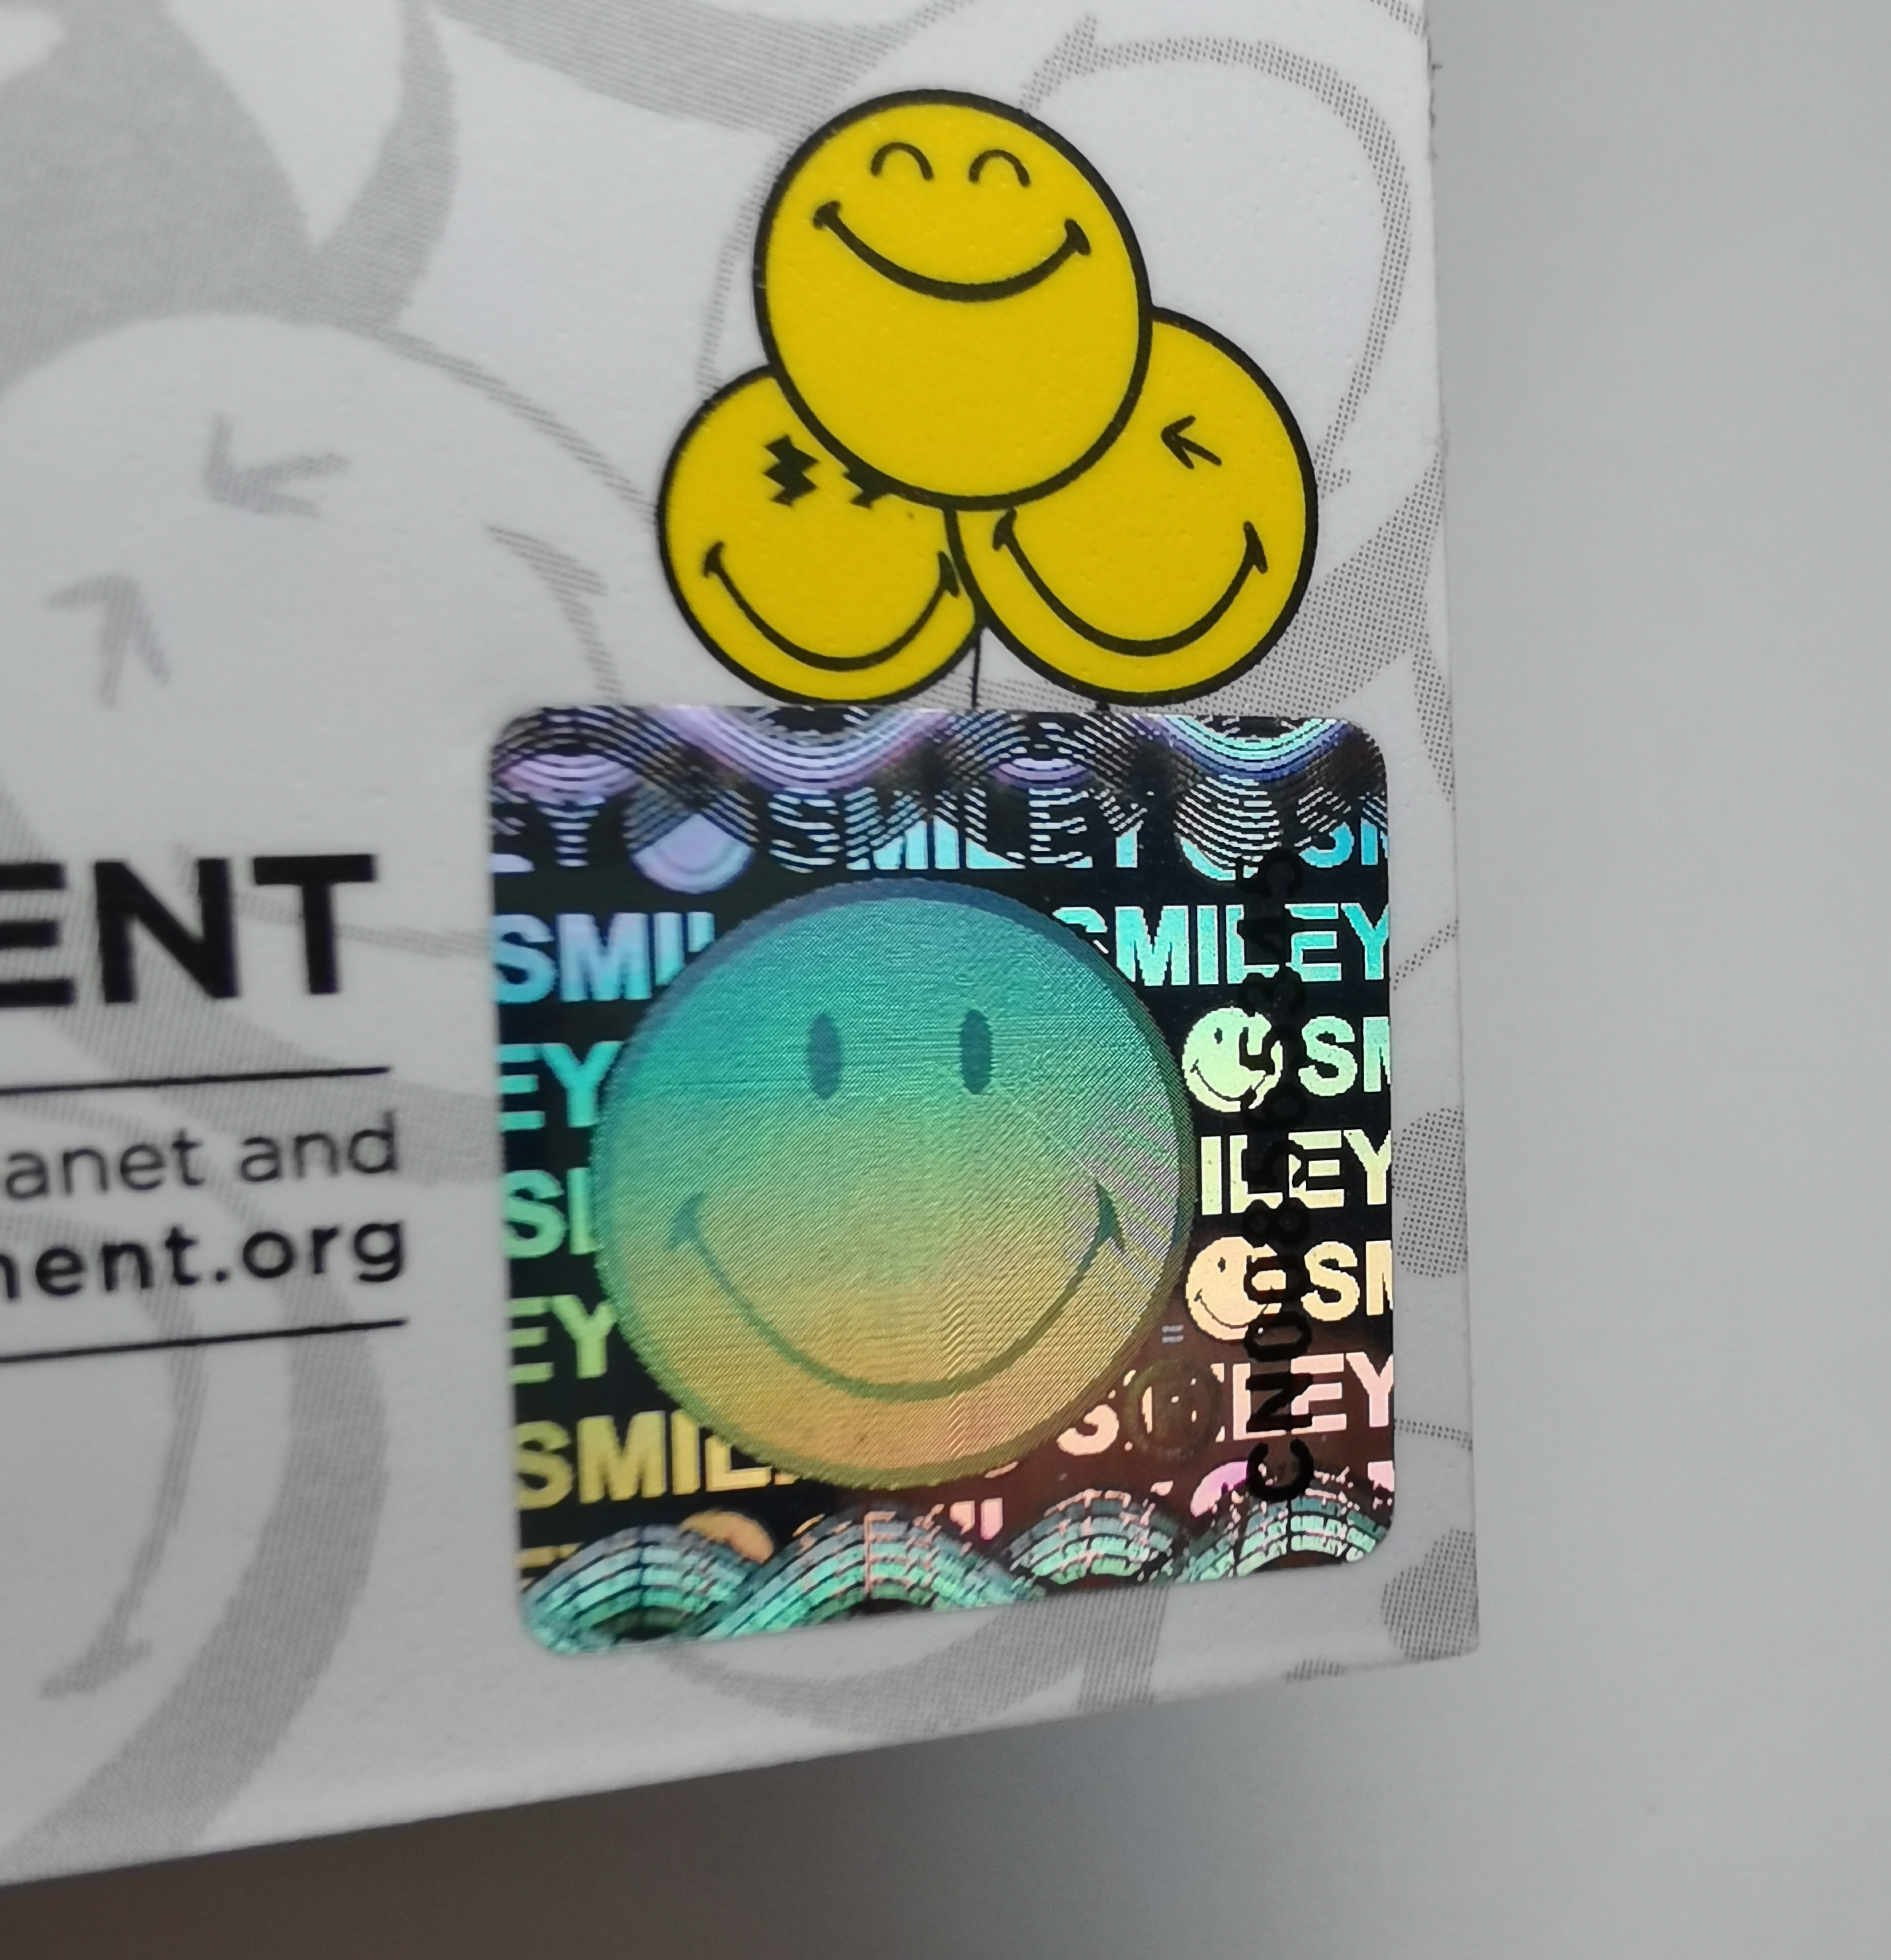 Smiley face holographic sticker serial number